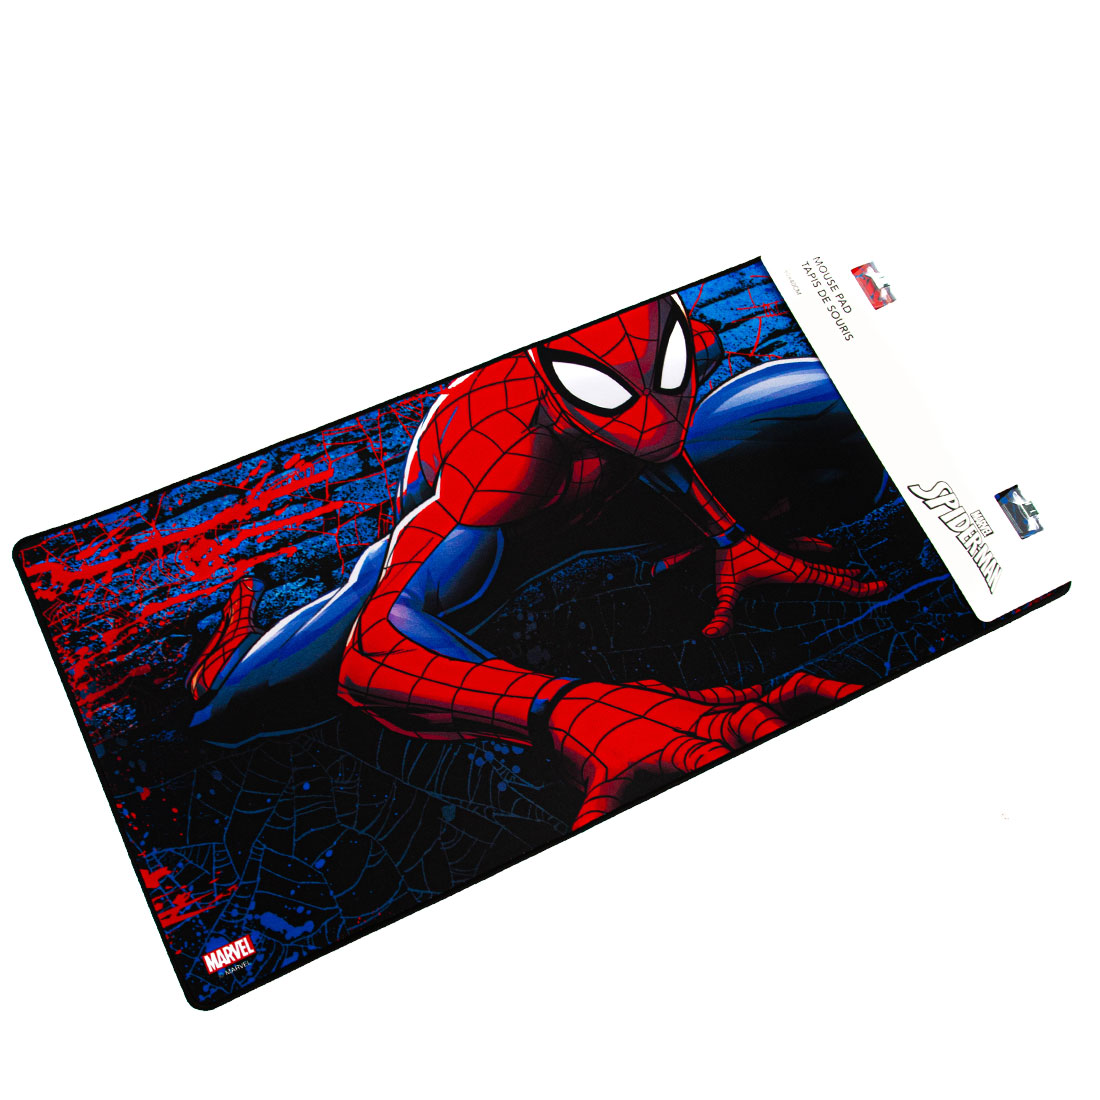 MINISO Marvel Desk Pad Office Non-Slip Desk Cover Protector Desk Mat Mouse Pads Desk Writing Mat for Office and Home Work Spiderman - image 1 of 7